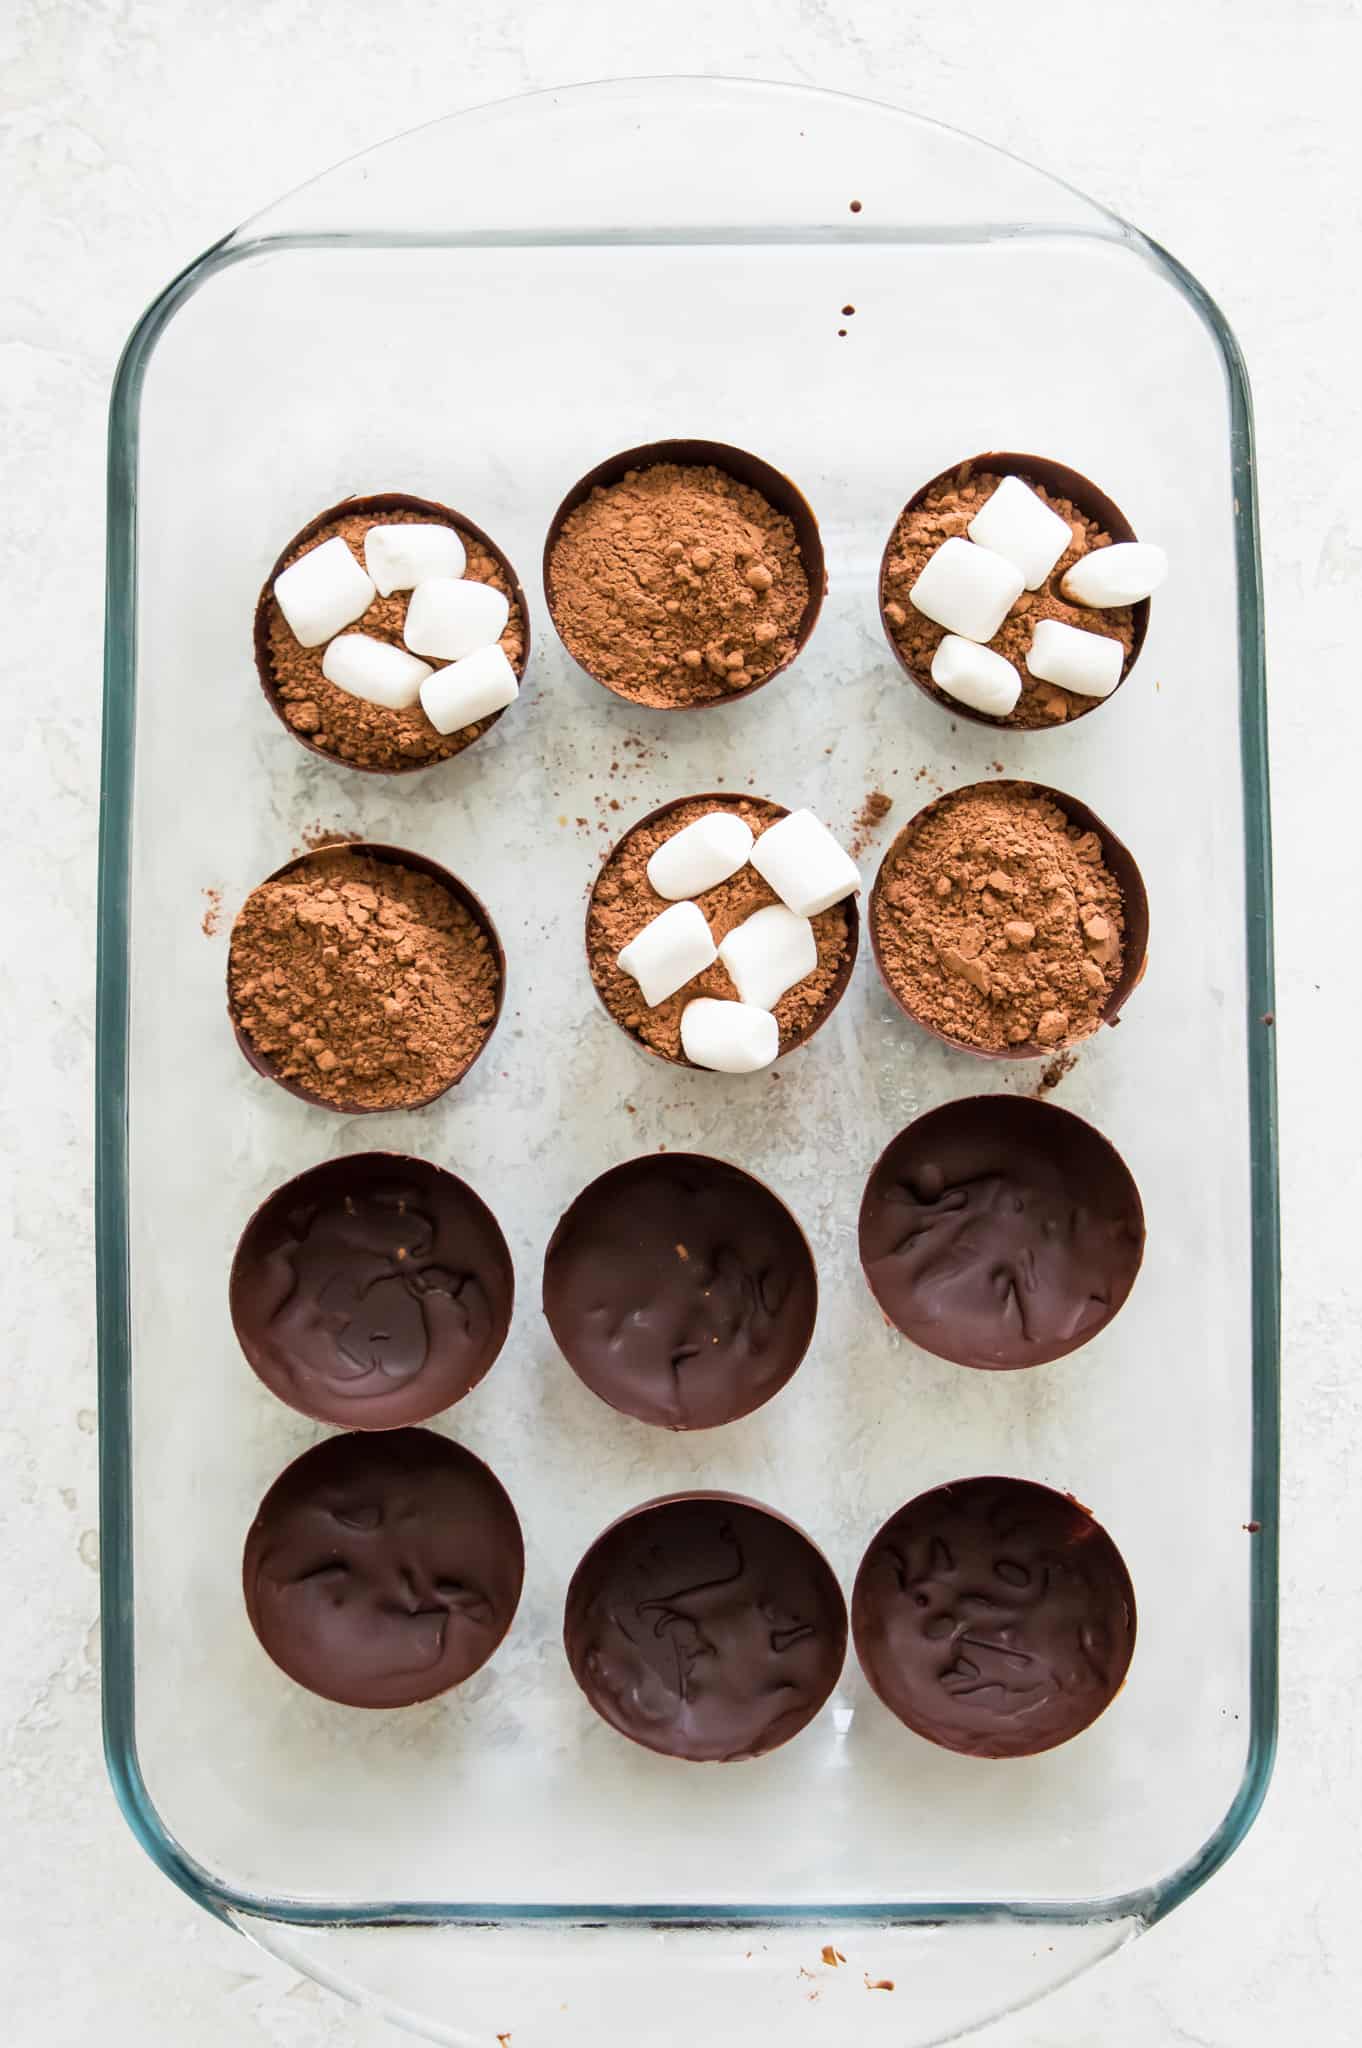 Hot chocolate bombs filed with cocoa and marshmallows.